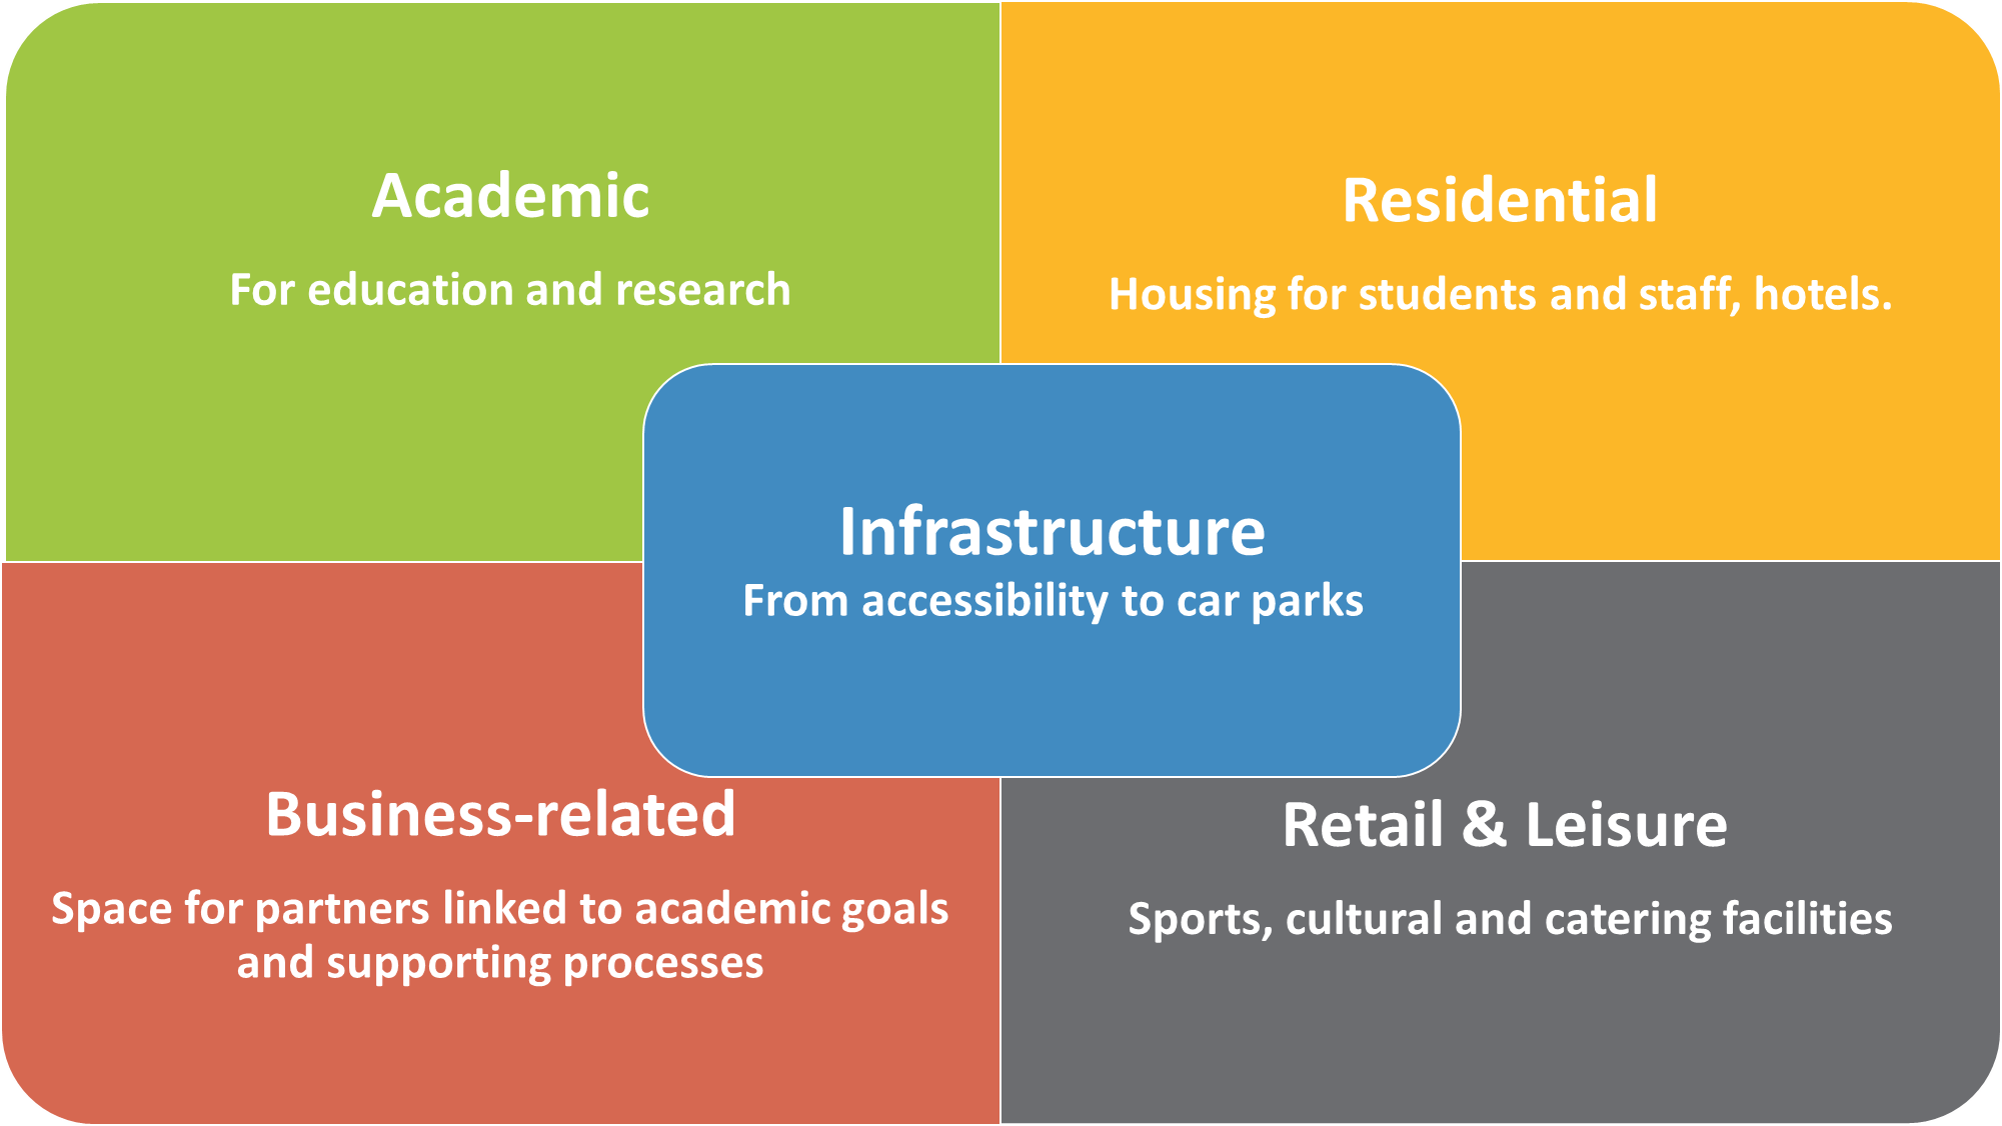 University Management Trends: Are You Using a Campus Master Plan 